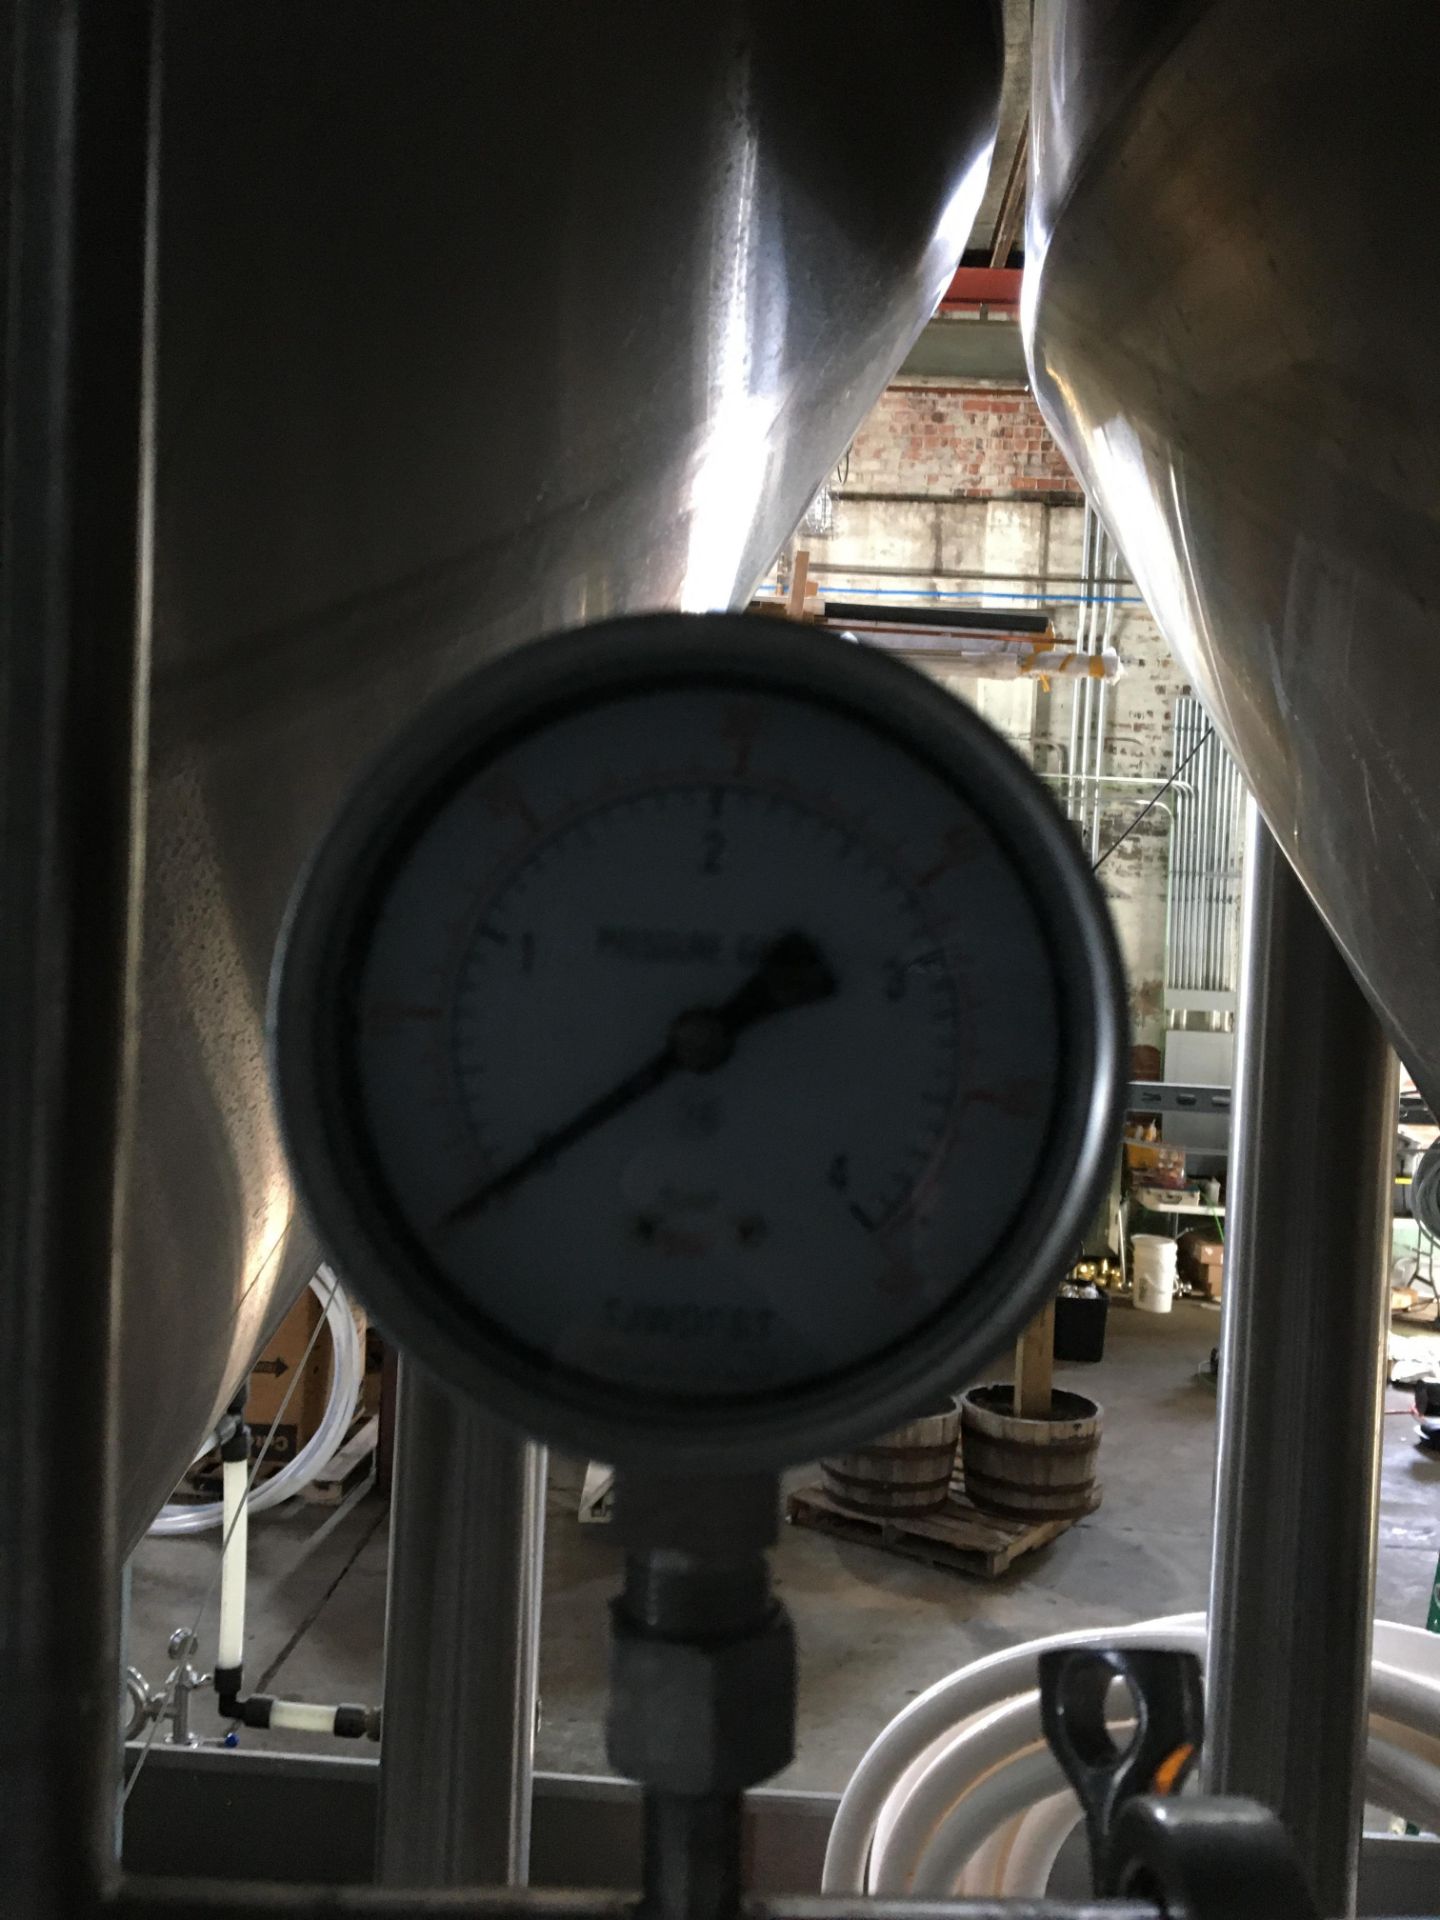 80-BBL Minnetonka Fermentation Tank, Model 80-BBL, Year 2017, Stainless Steel; Vessel store wort and - Image 11 of 15